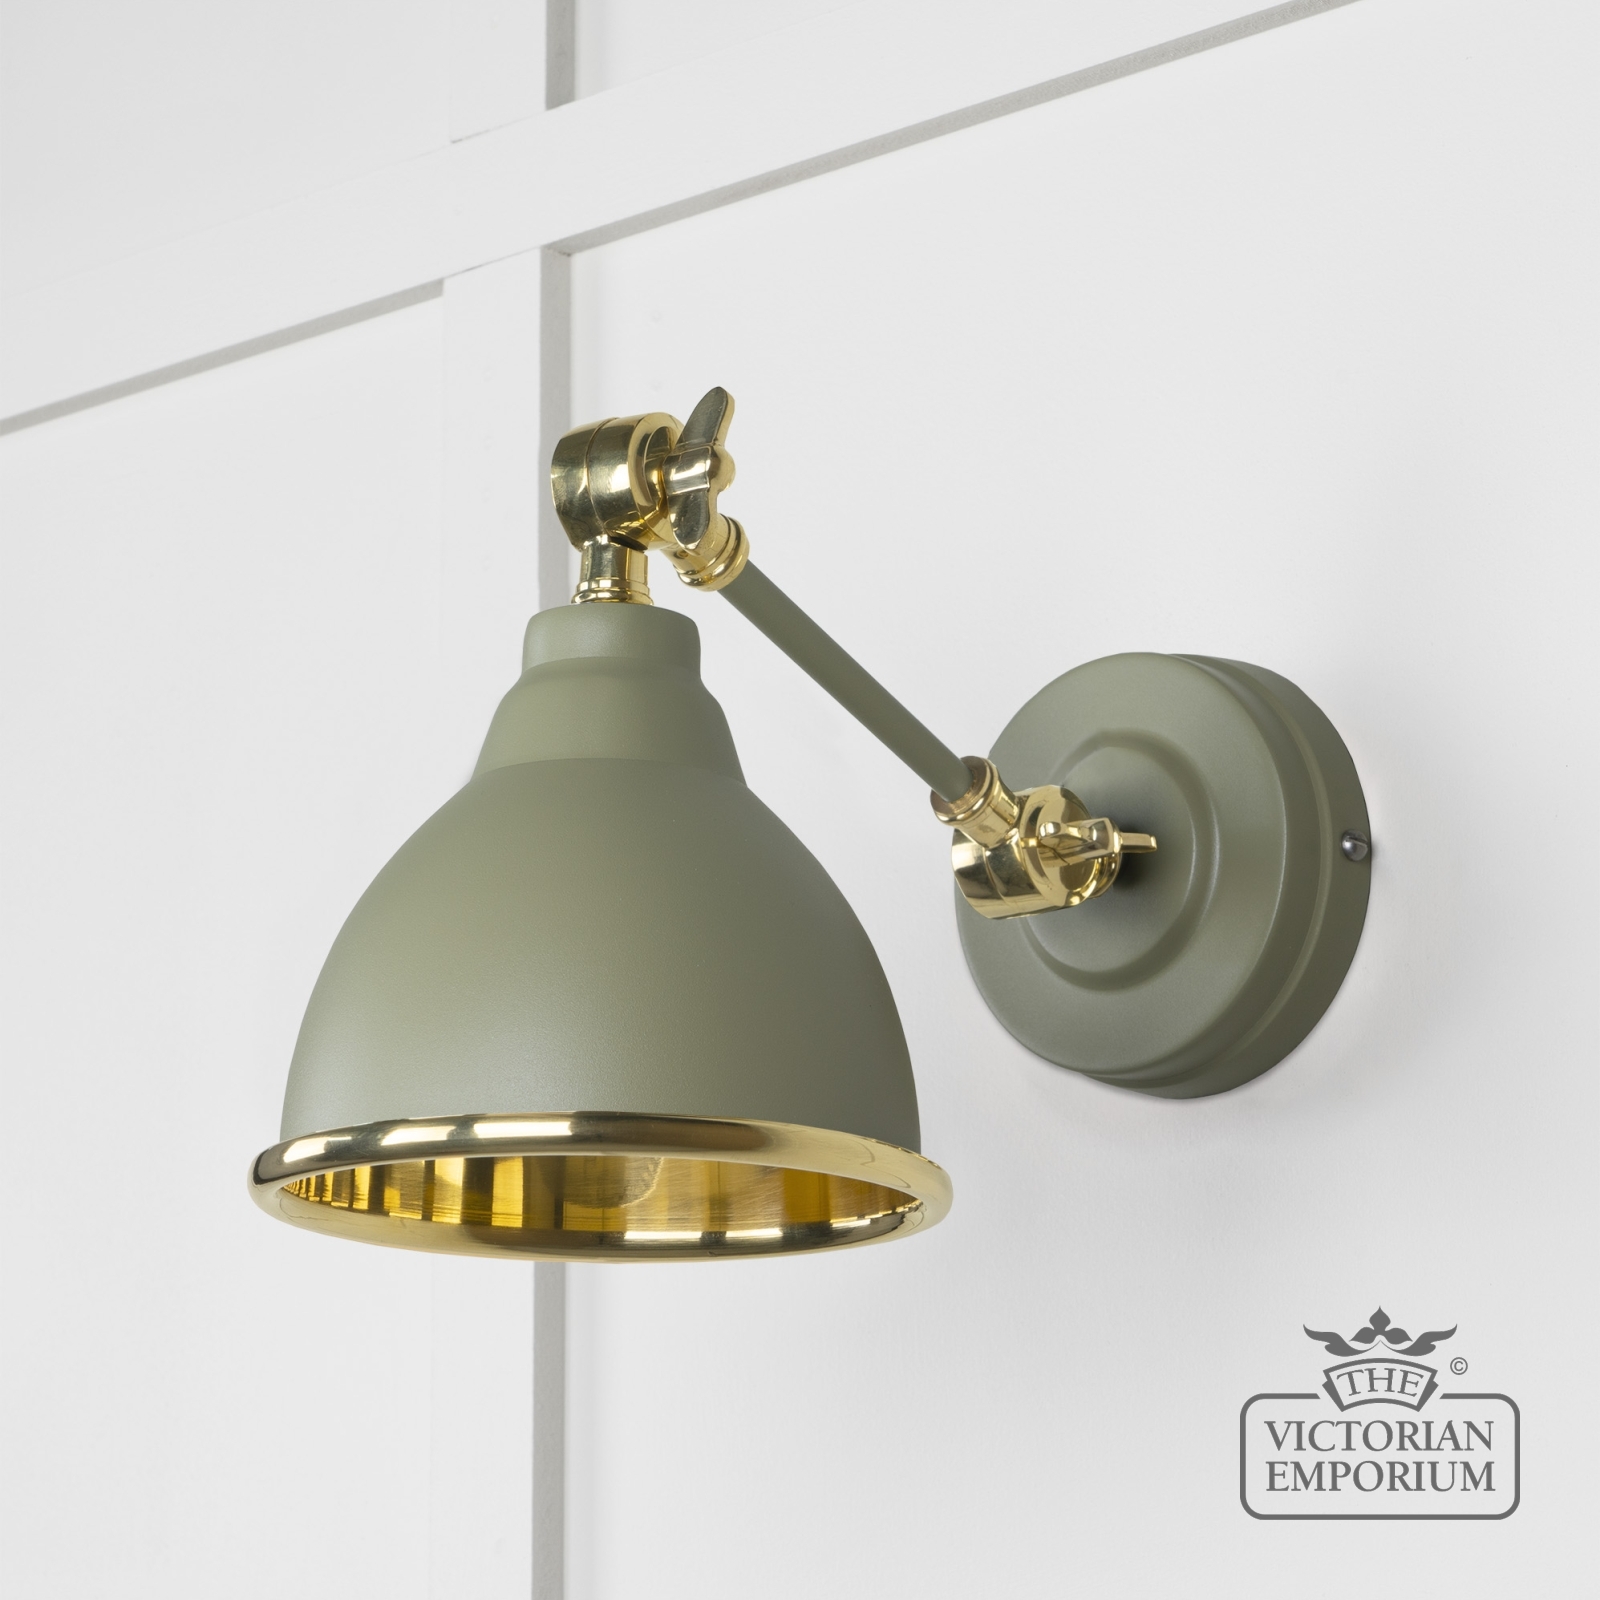 Brindle Wall Light with Smooth Brass Interior and Tump Exterior